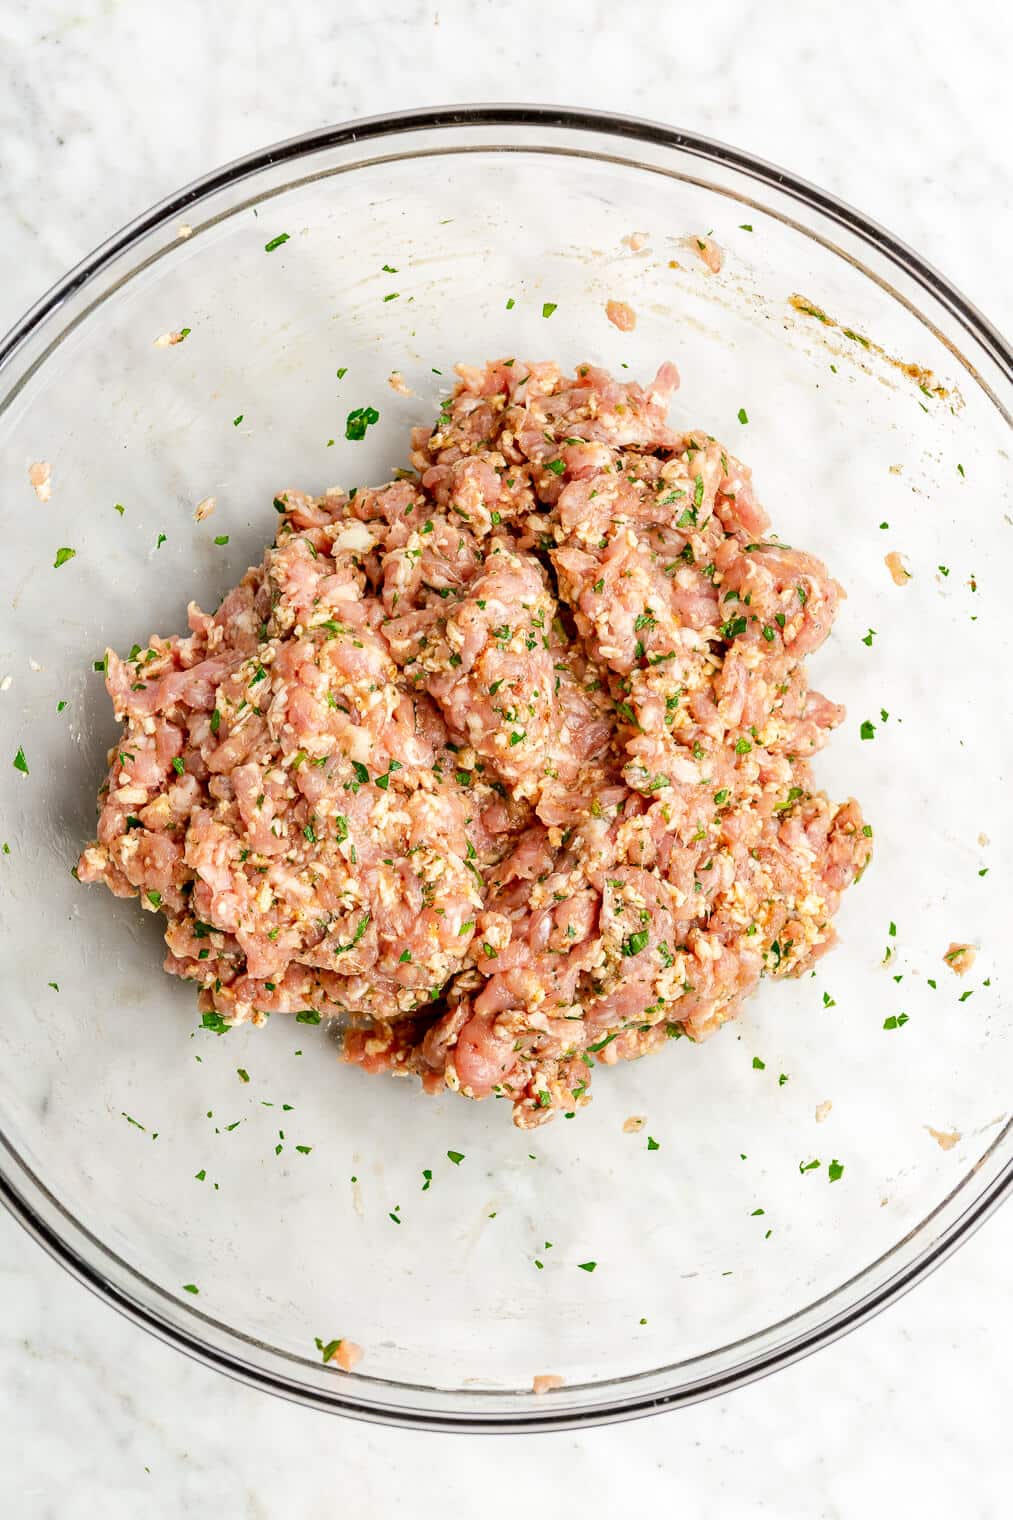 A large glass bowl with a raw Swedish meatball mixture in it.